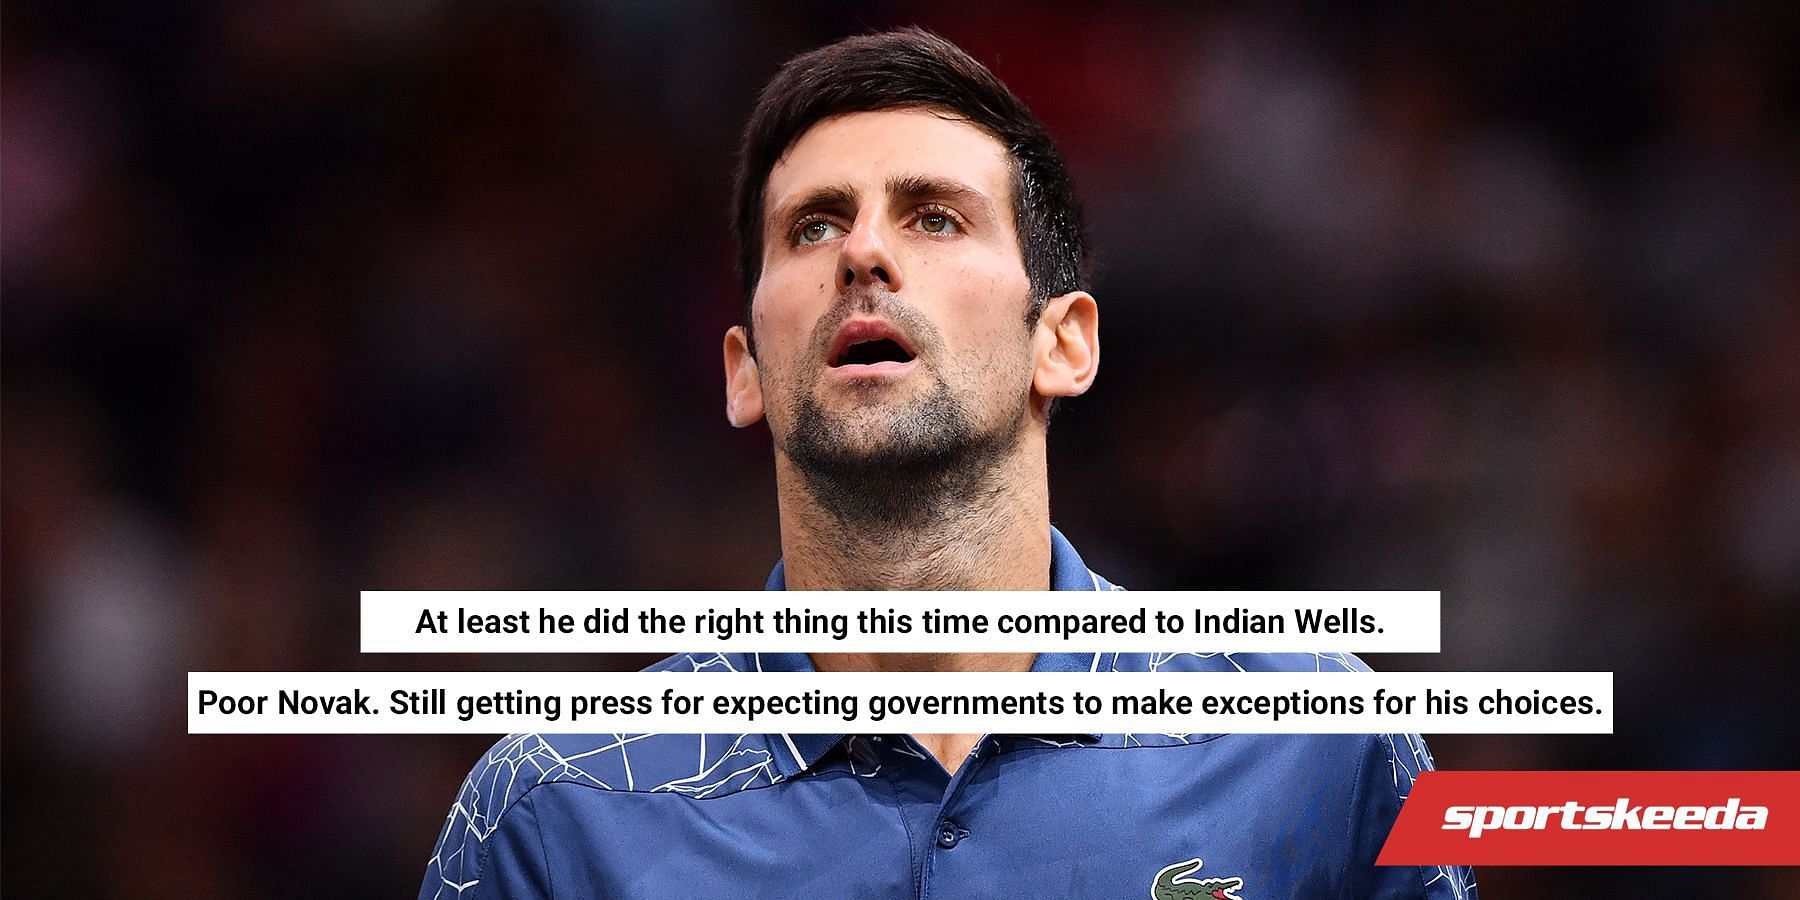 Novak Djokovic is officially out of the Rogers Cup.